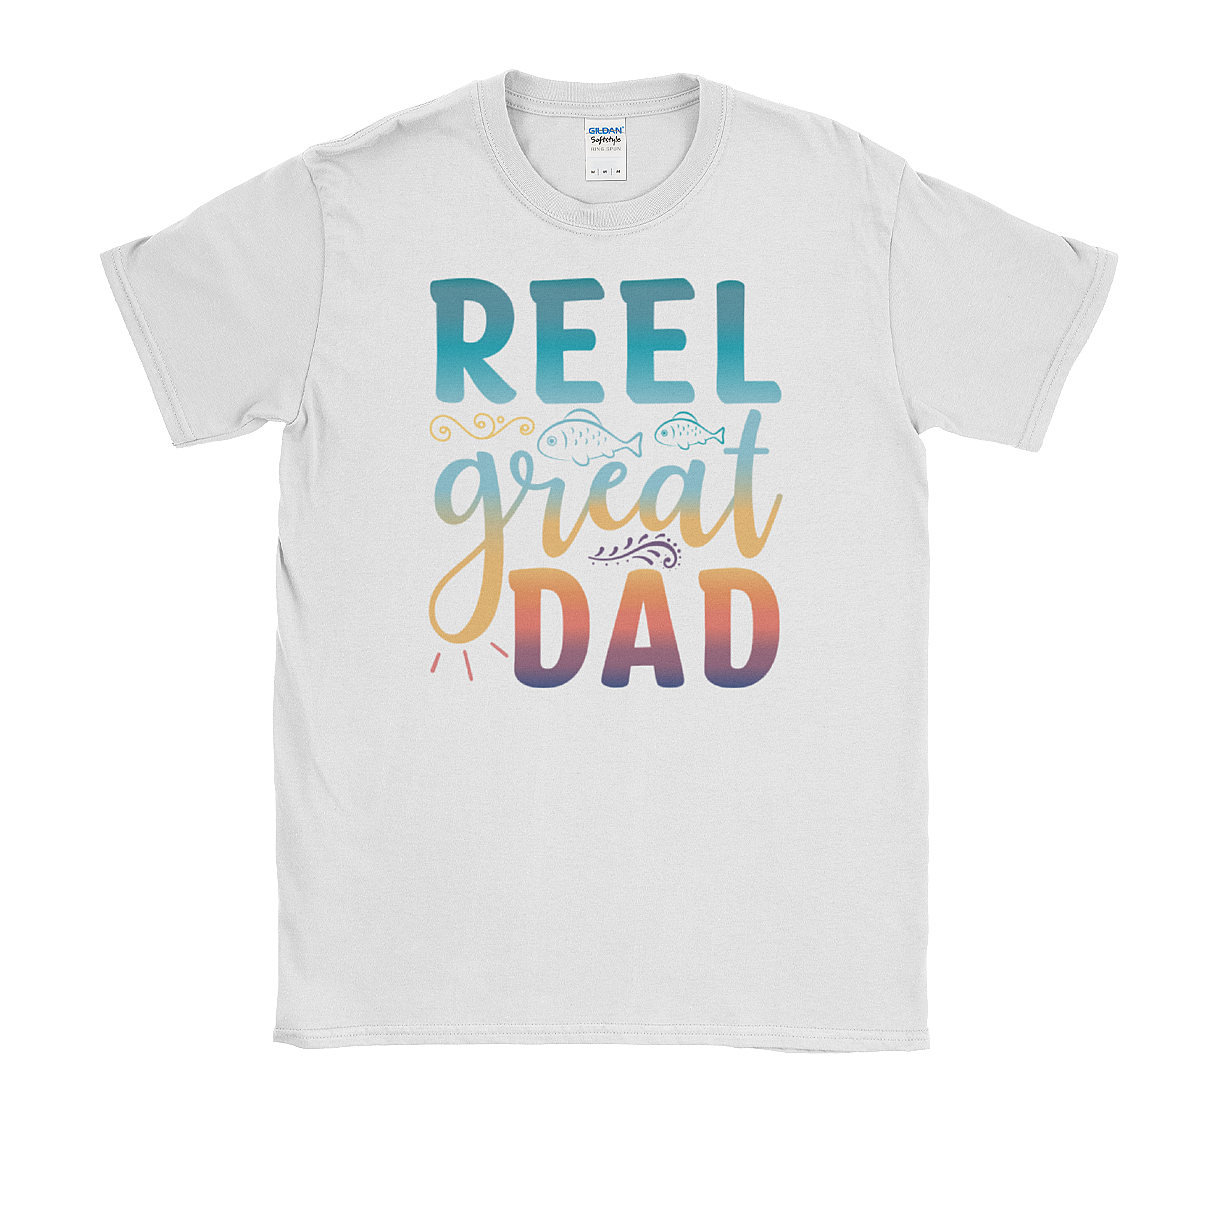 Reel Great Dad Softstyle Tee